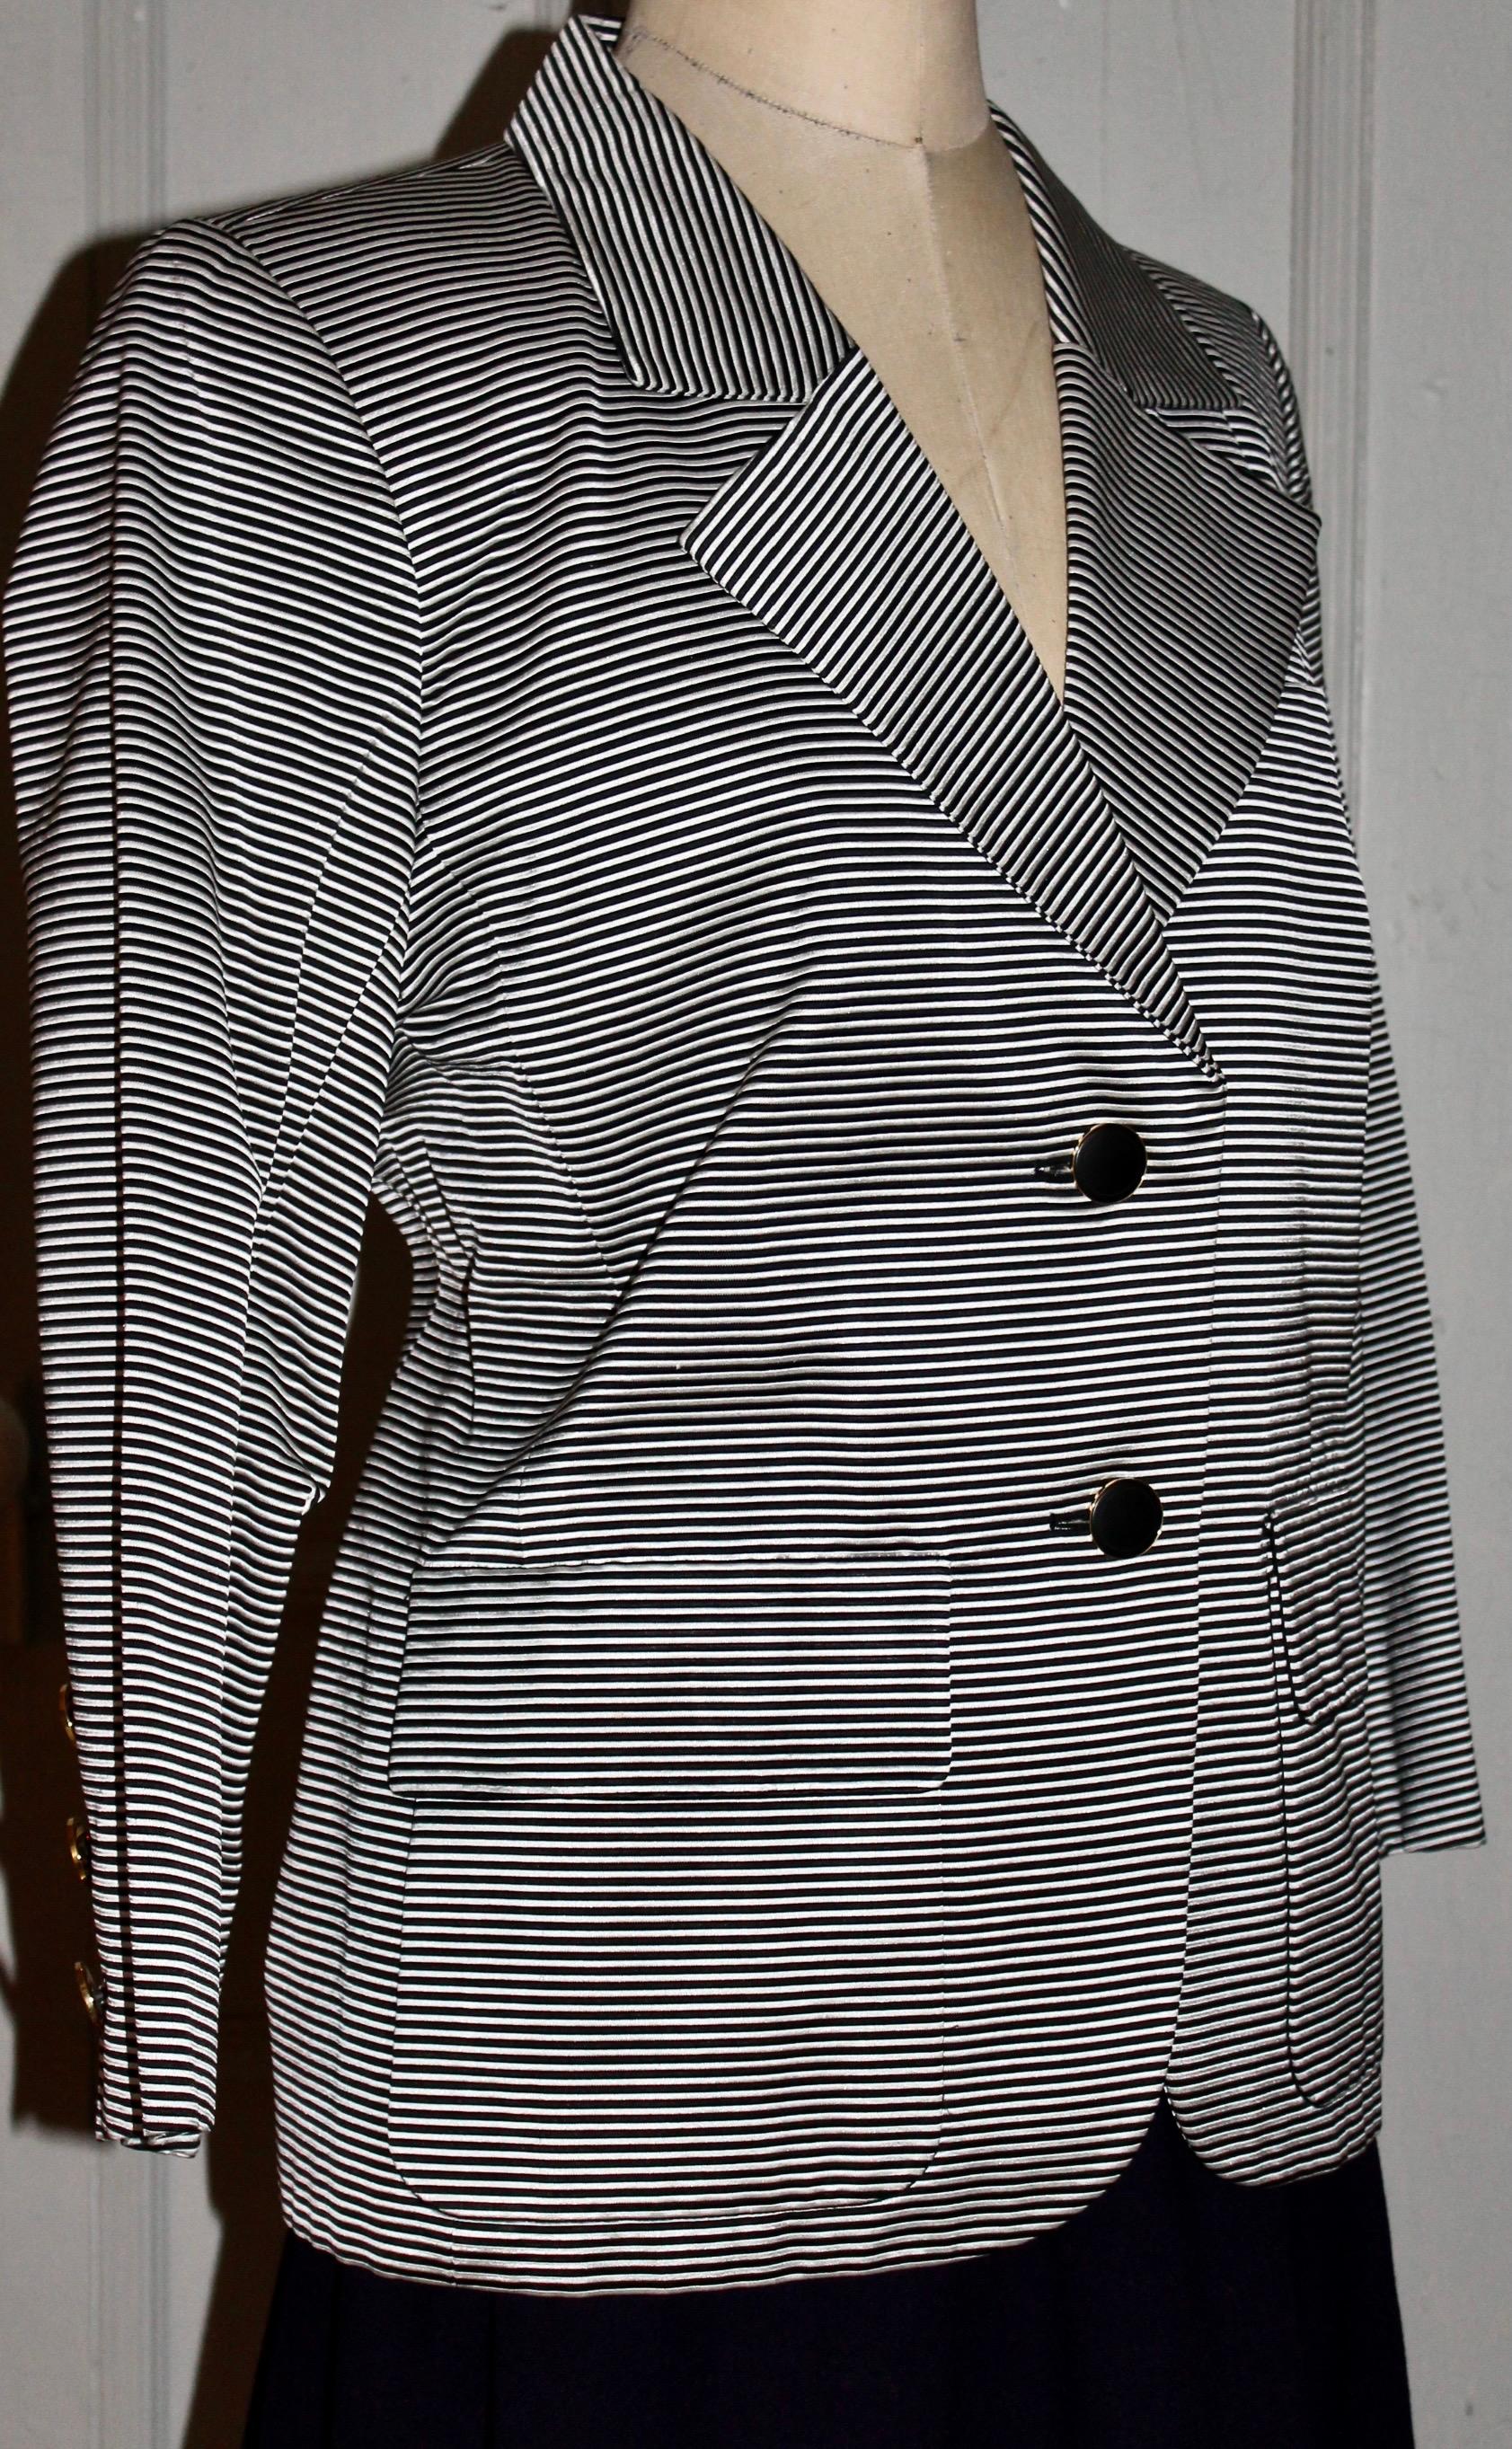 A YSL Rive Gauche black and white horizontal pinstriped acetate/cotton jacket.
EU size 44, padded shoulders